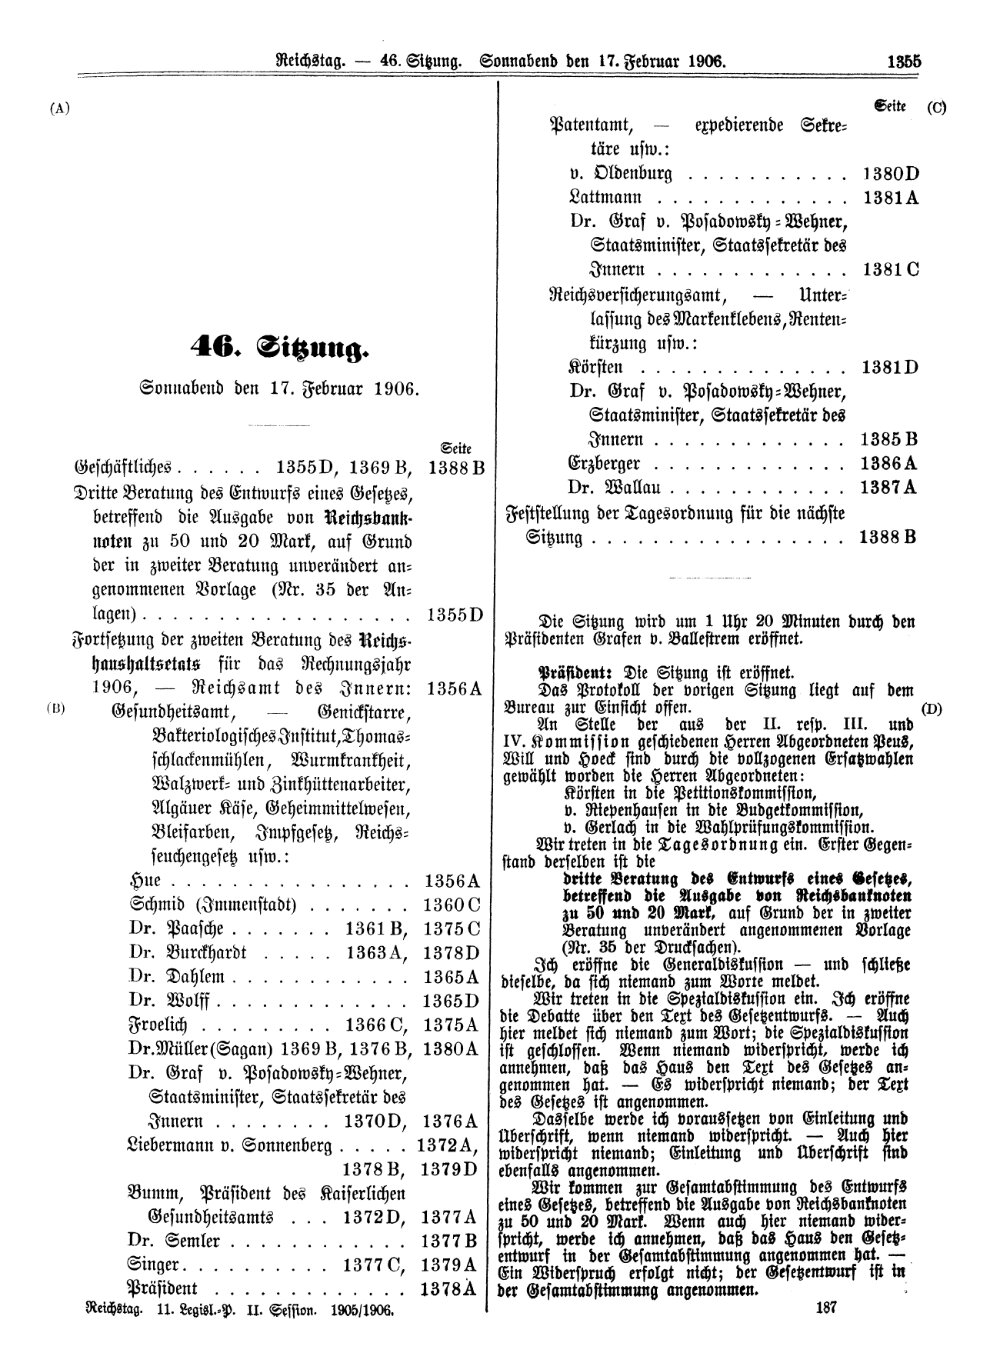 Scan of page 1355